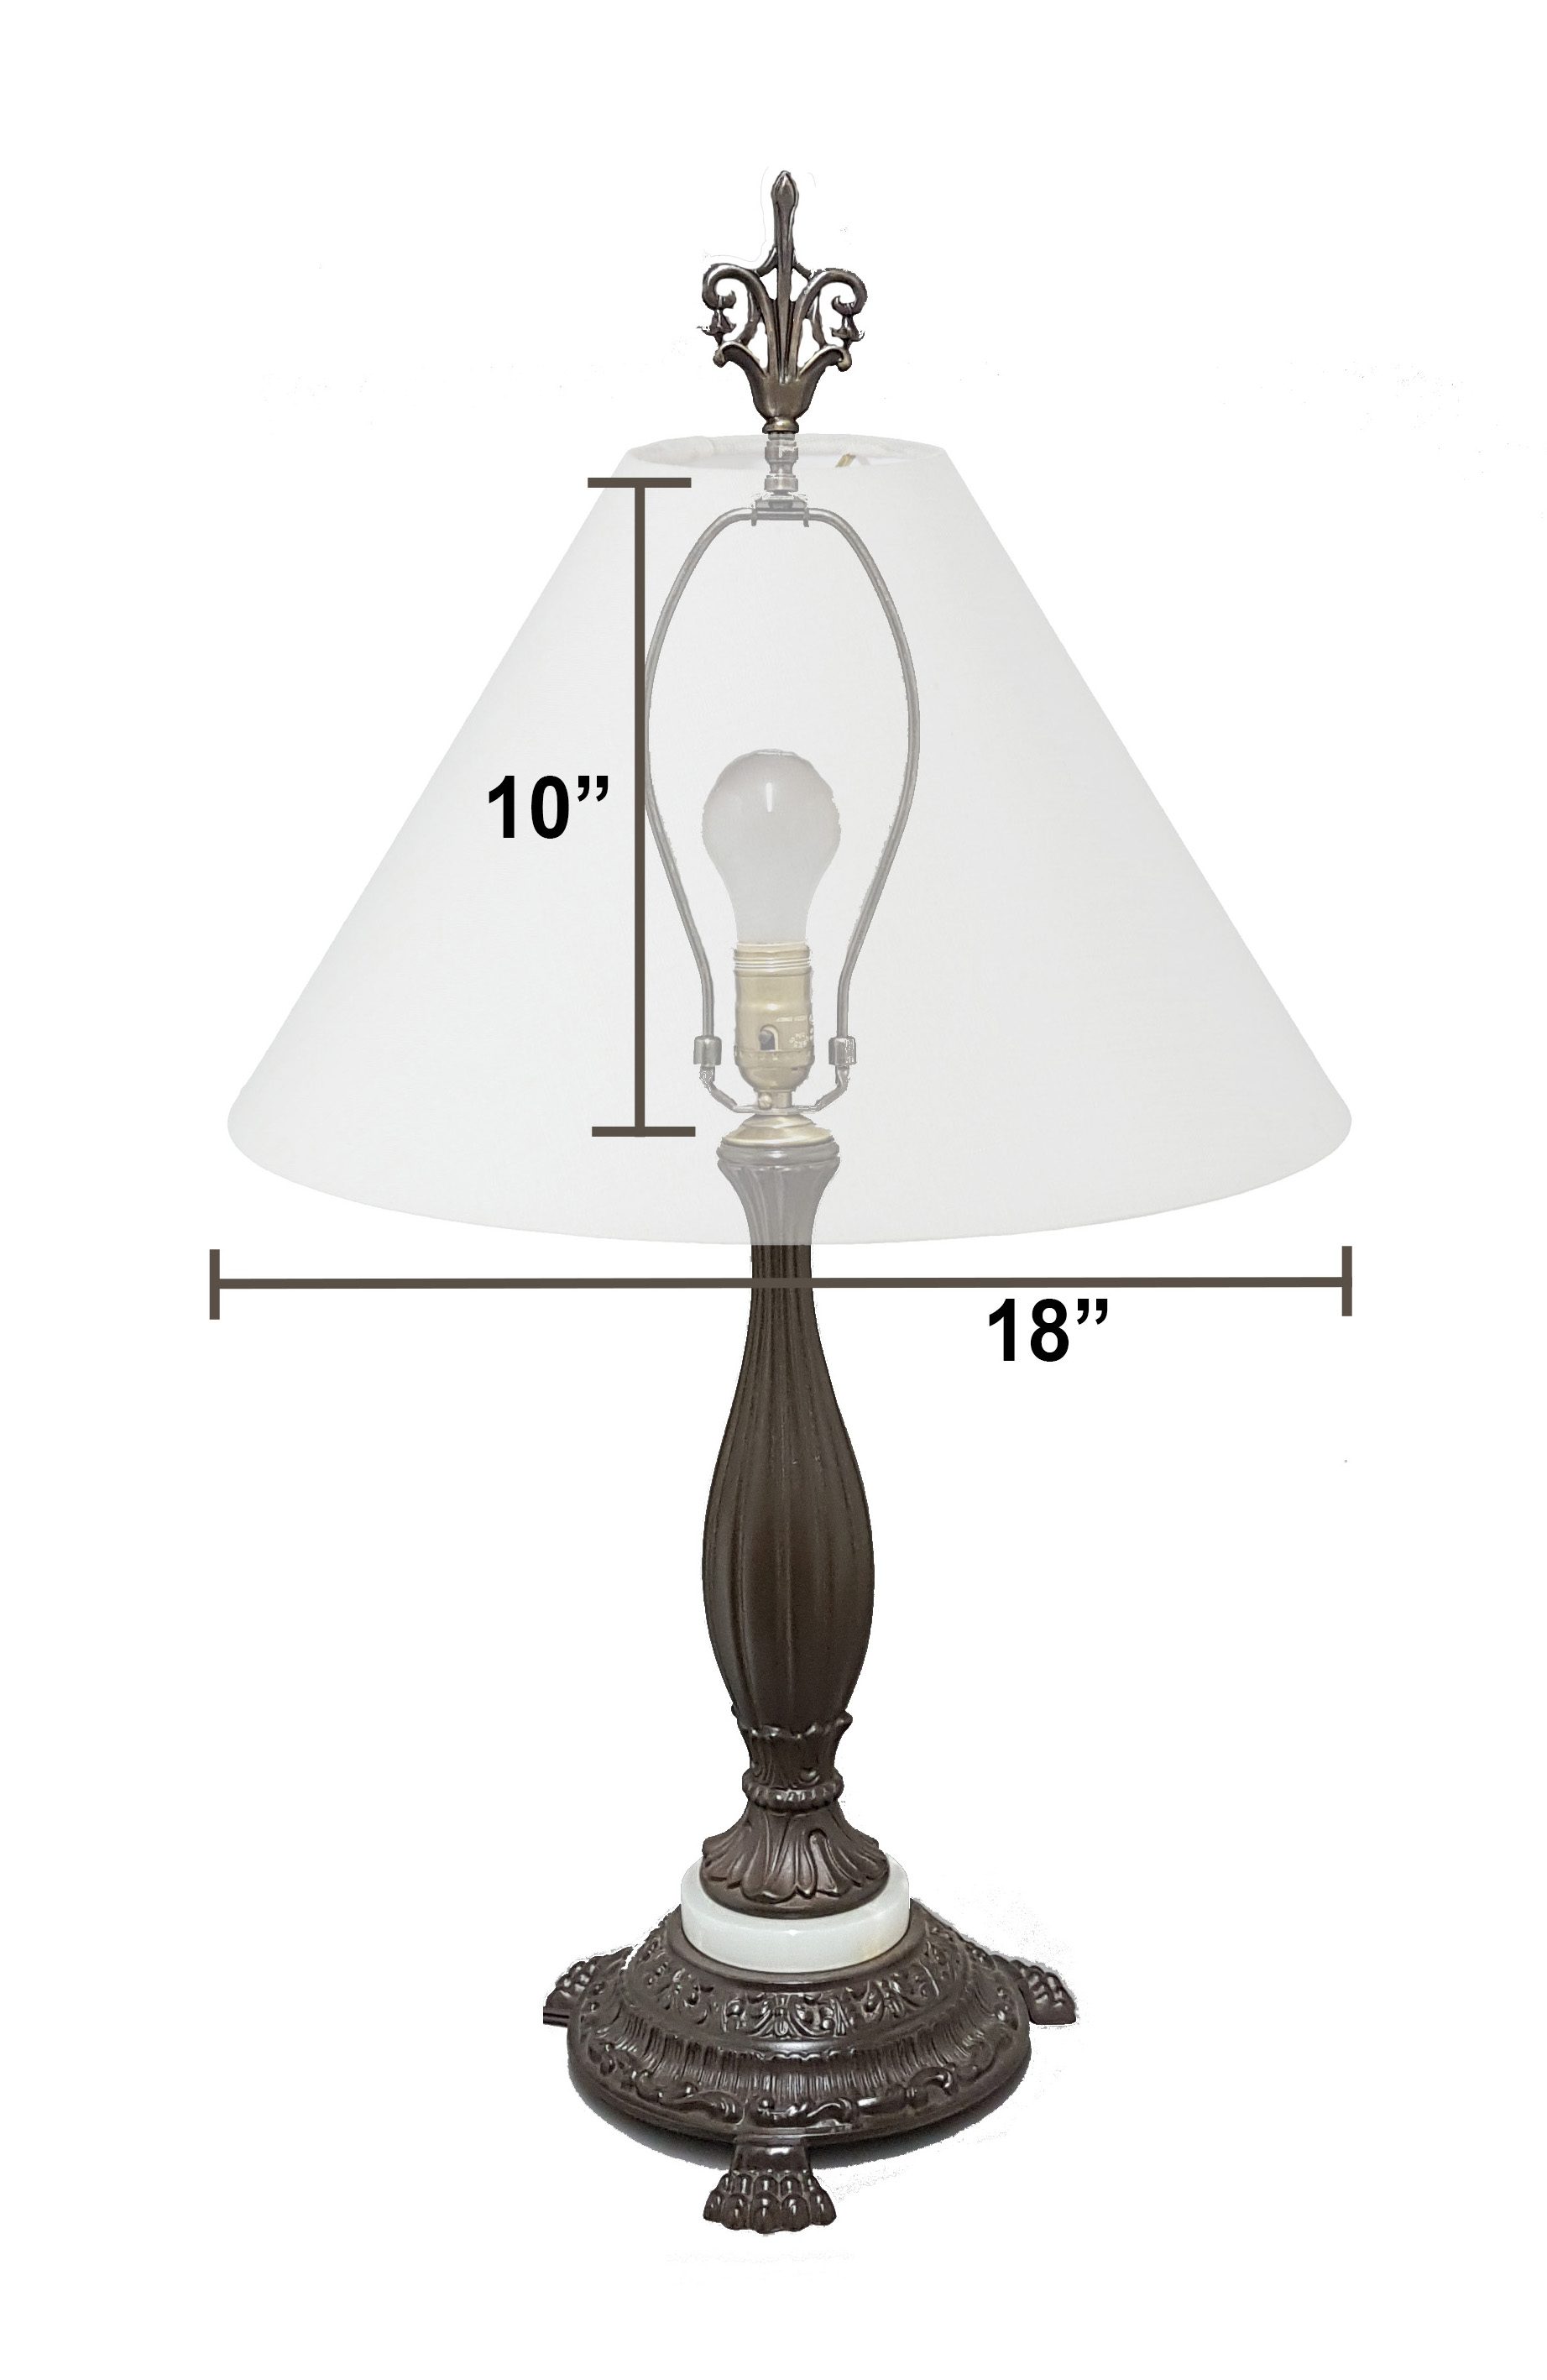 Fabric Shade, How To Determine Table Lamp Size